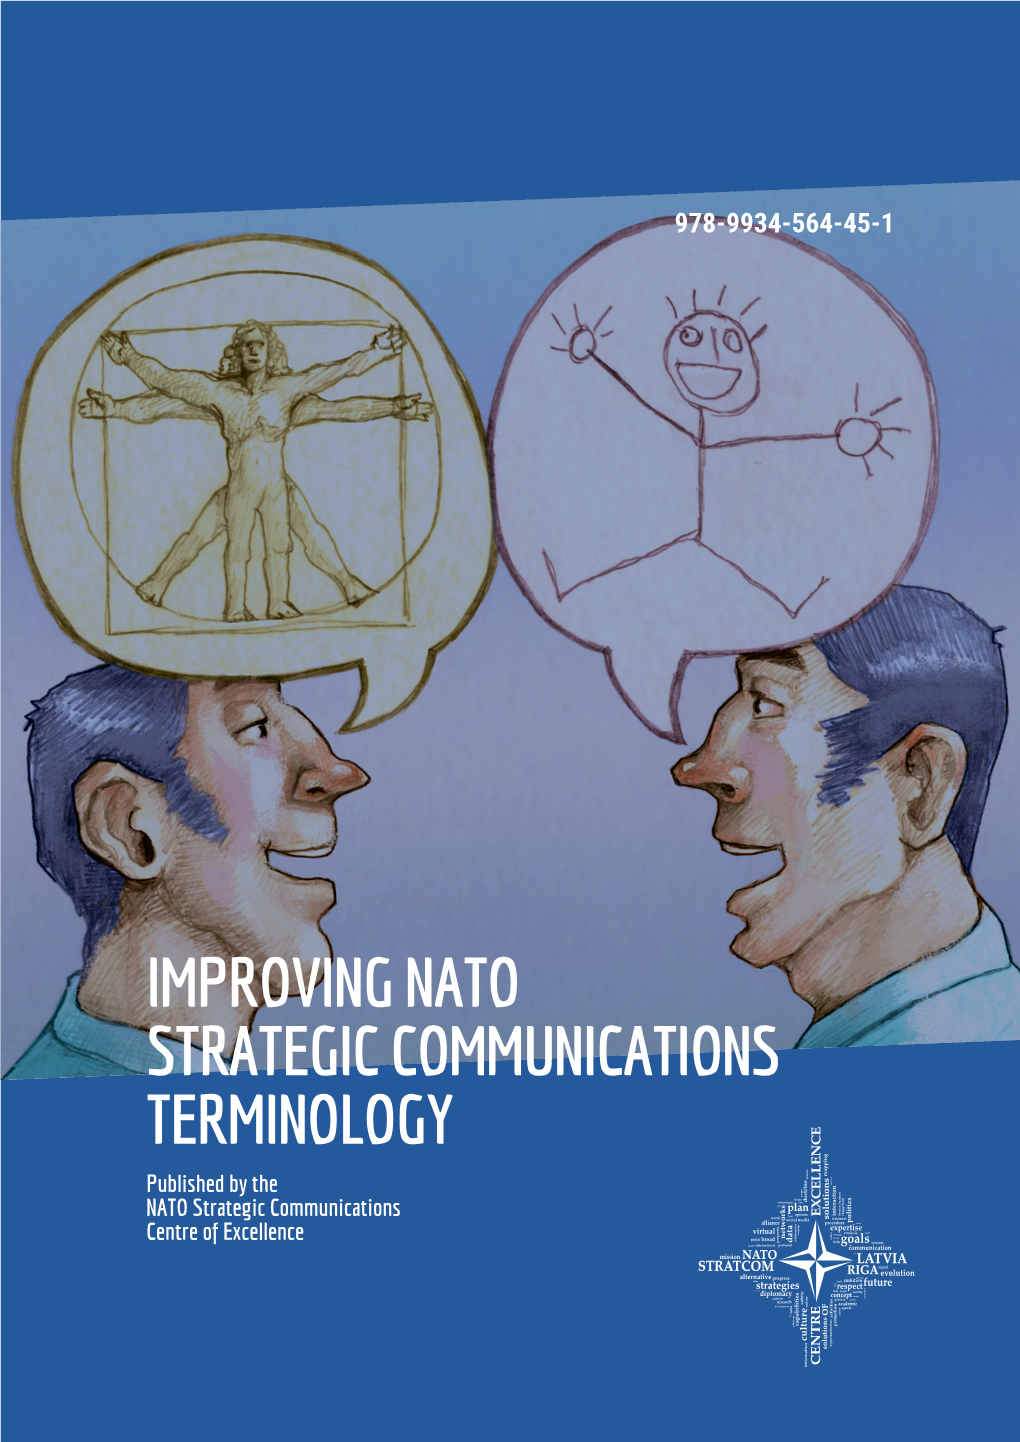 IMPROVING NATO STRATEGIC COMMUNICATIONS TERMINOLOGY Published by the NATO Strategic Communications Centre of Excellence ISBN: 978-9934-564-45-1 Authors: Dr